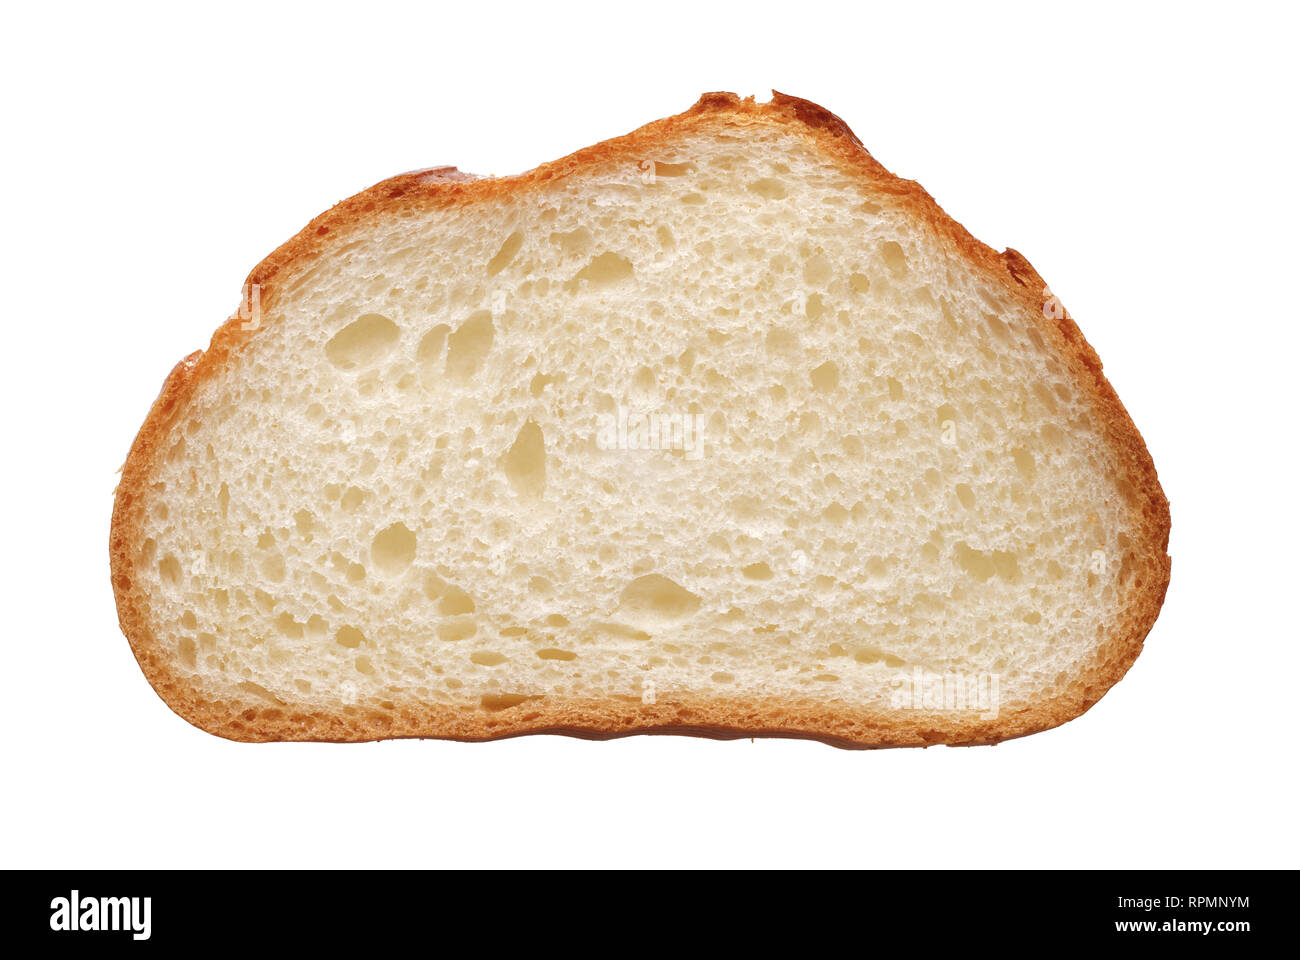 Food and drinks: single slice of fresh white wheat bread, isolated on white background Stock Photo